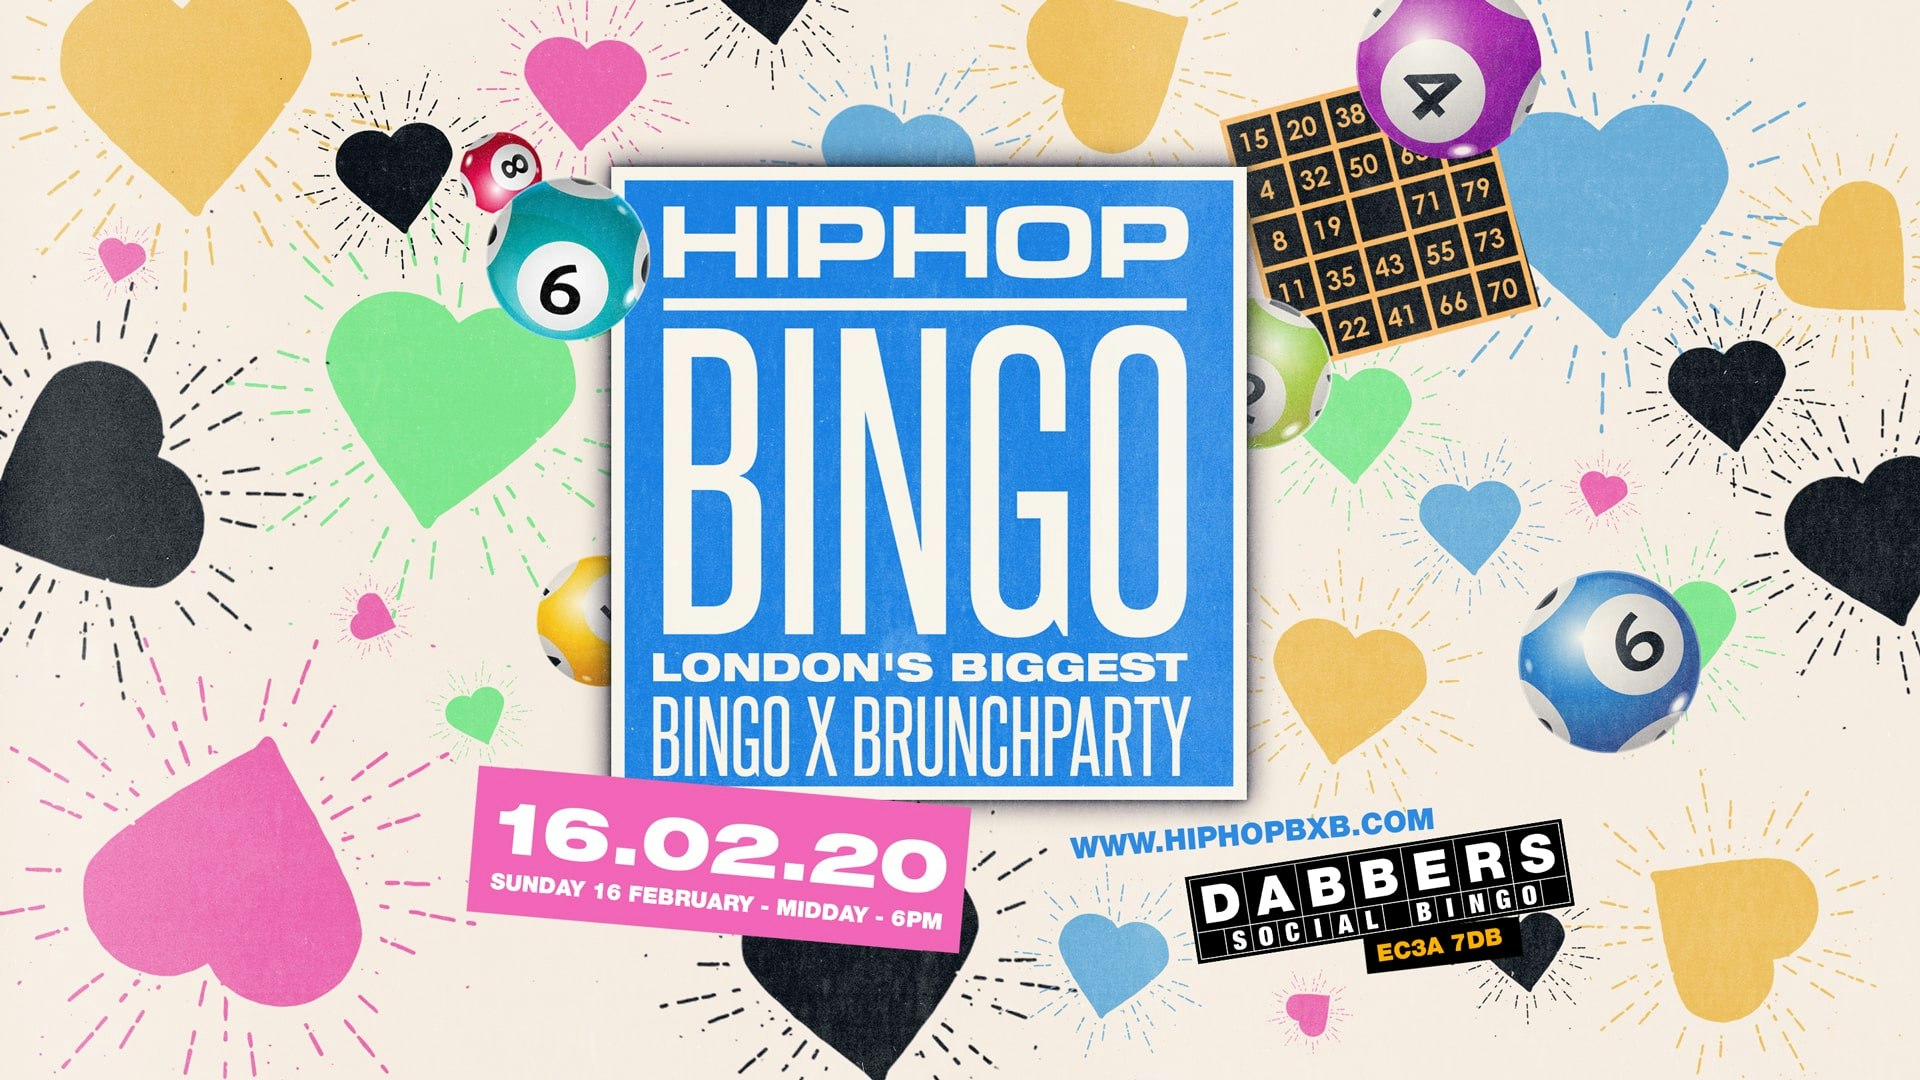 The London HipHop Bingo Brunch ? Valentines Weekend – February 16th | Live at Dabbers ?